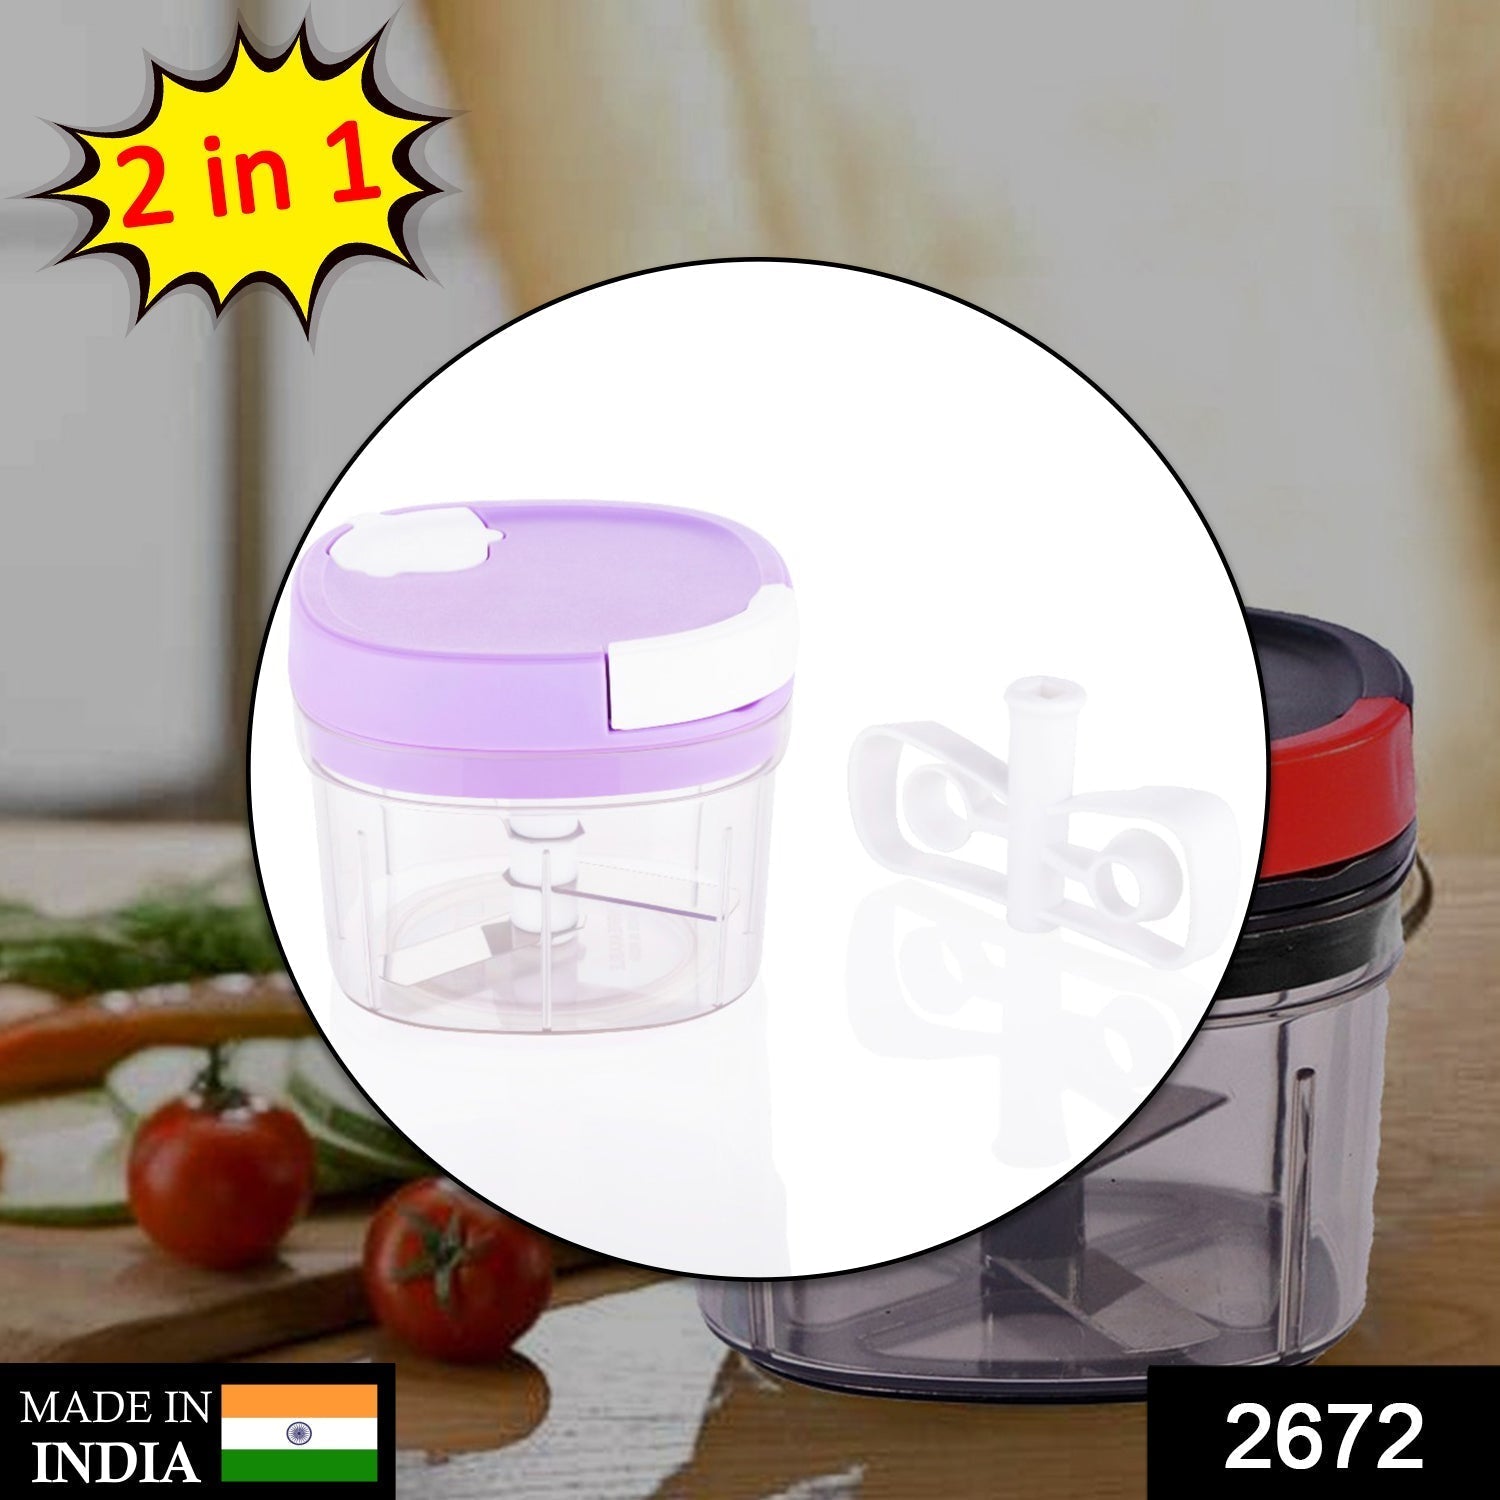 2672 2in1 Handy Chopper And Slicer For Home & kitchen (600ML Capacity)